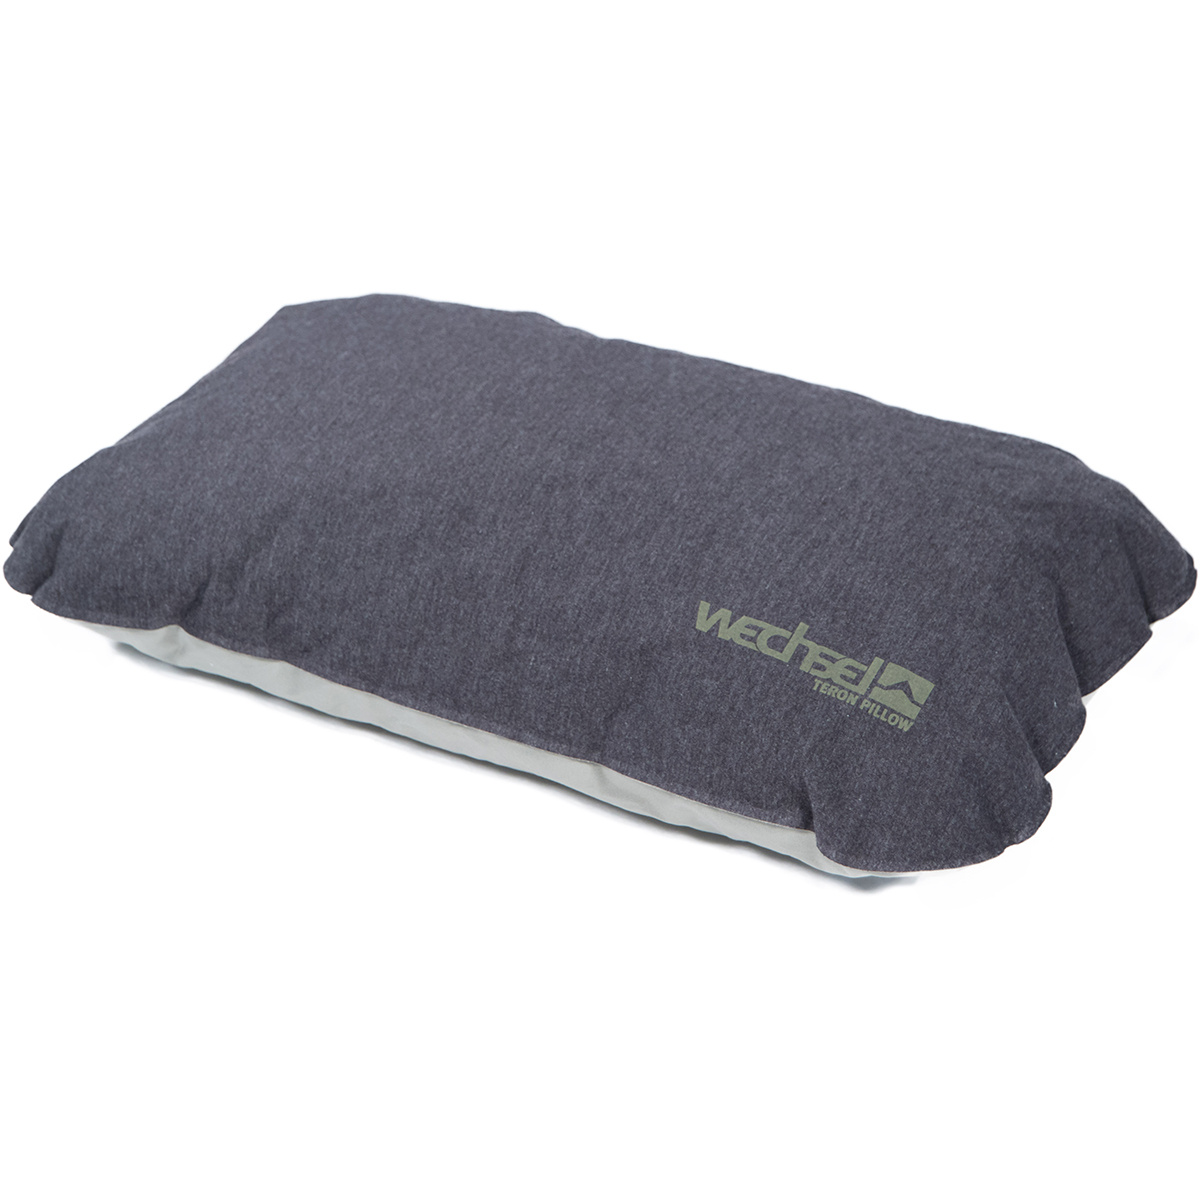 Image of Wechsel Teron Pillow